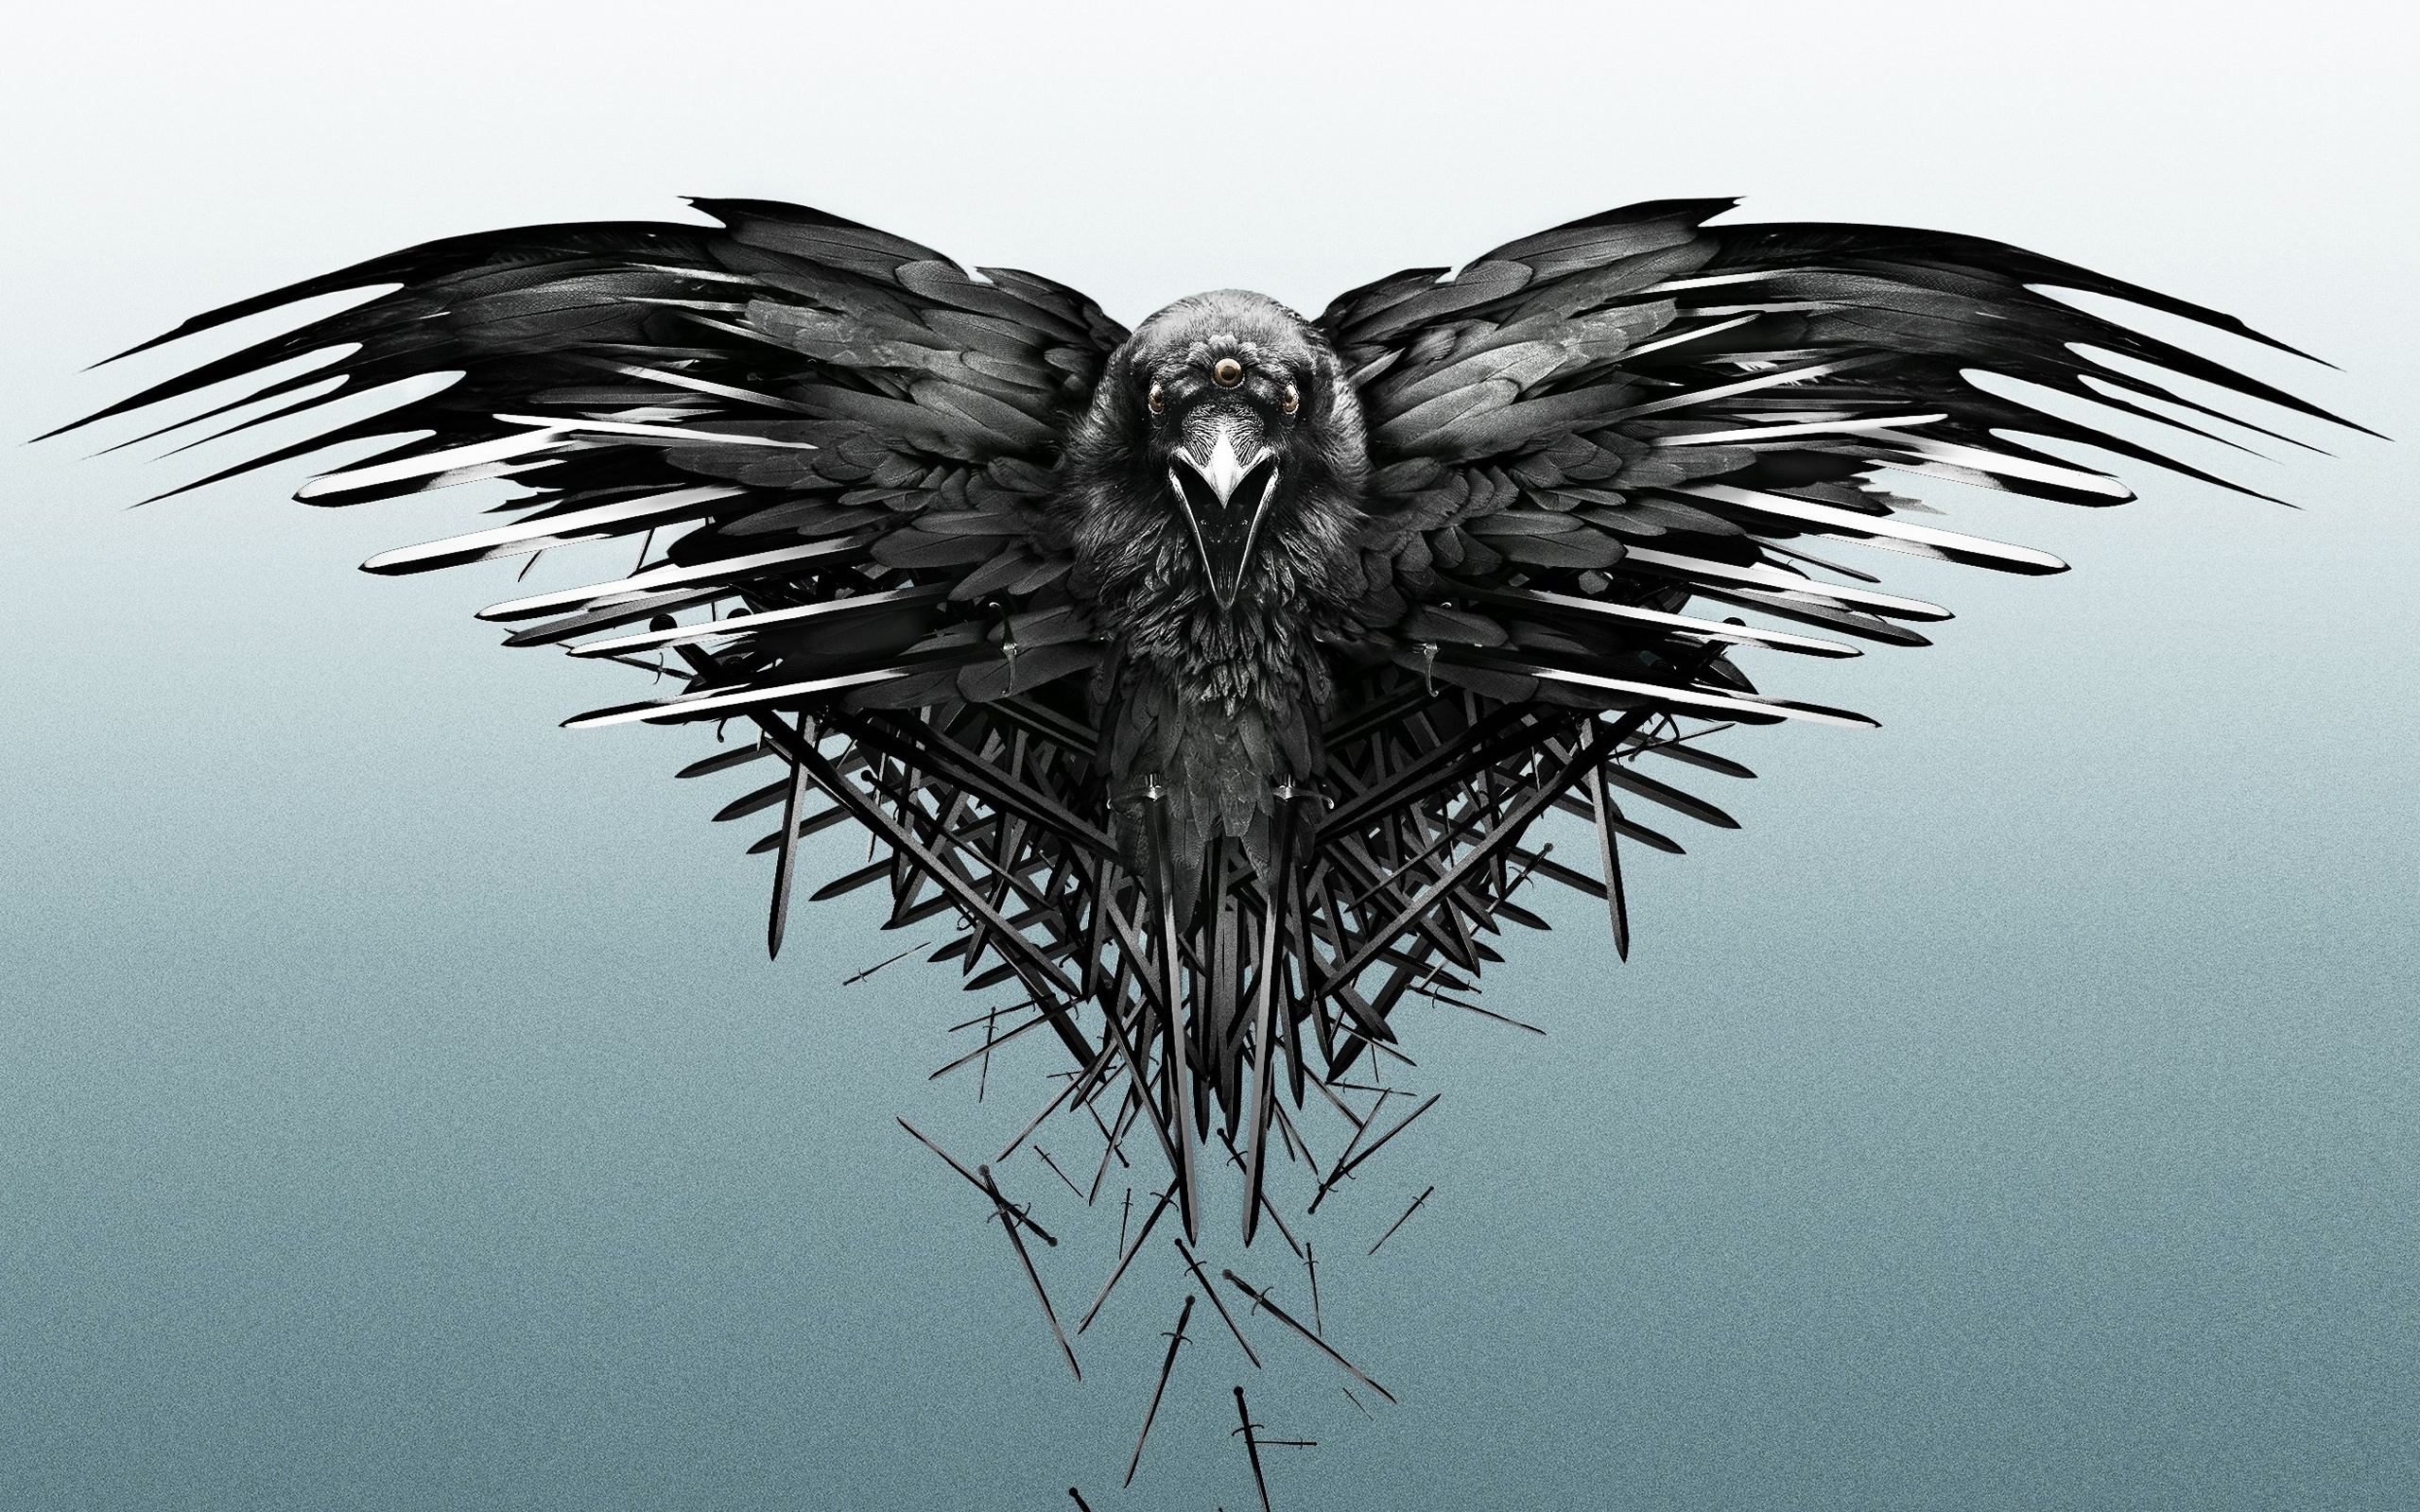 Game of Thrones Season 4 Wallpapers HD Wallpapers 2560x1600